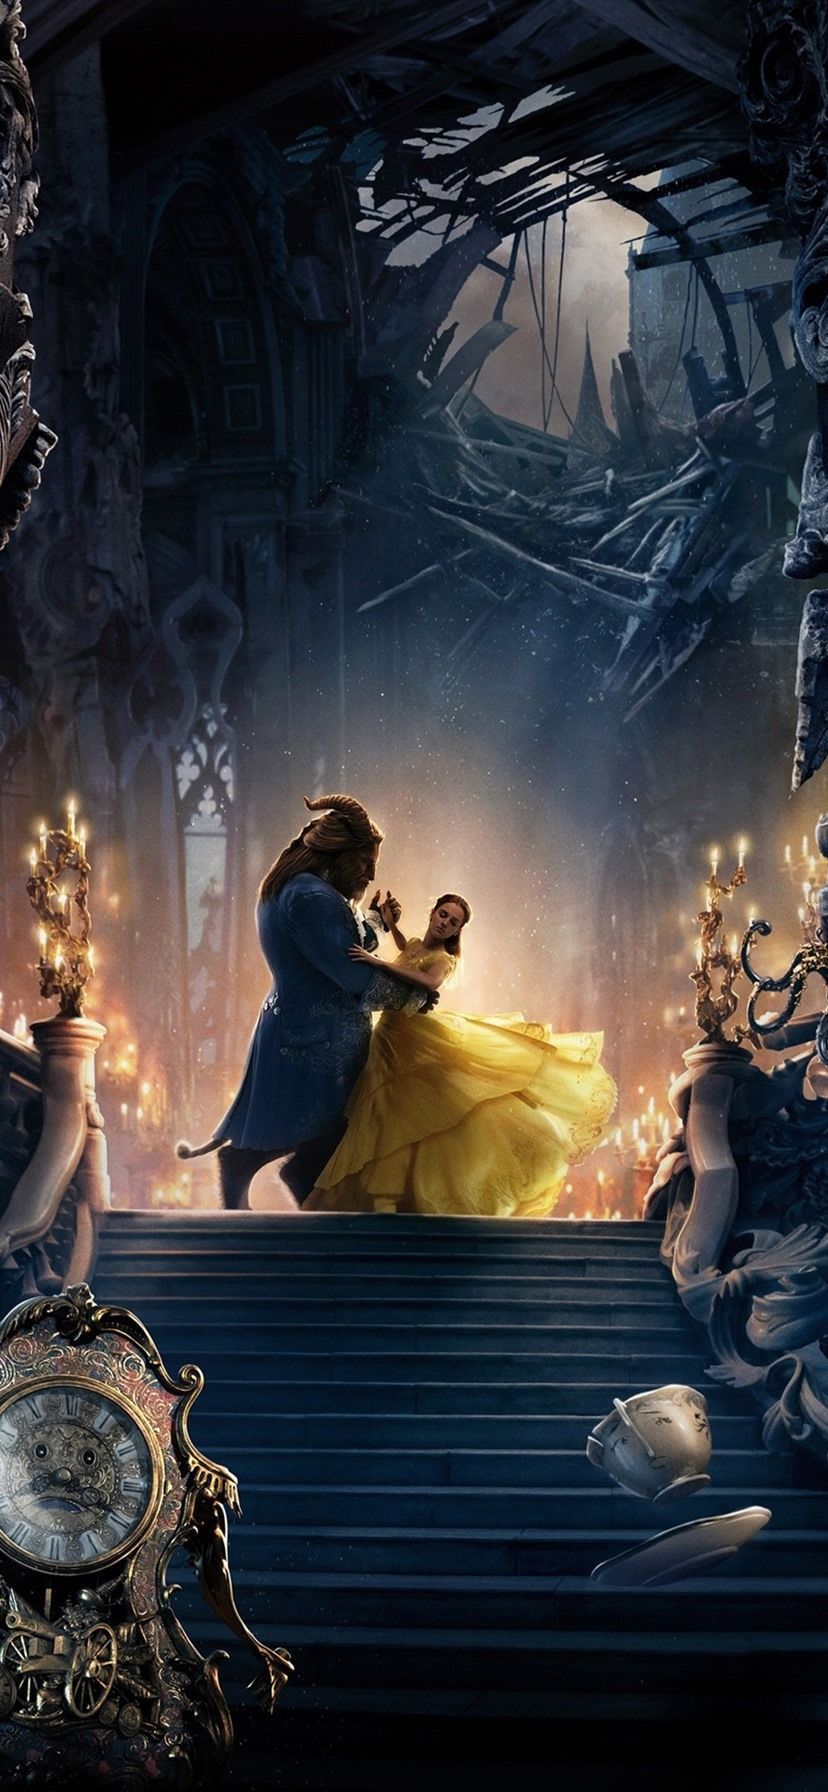 A poster for the movie beauty and beast - Belle